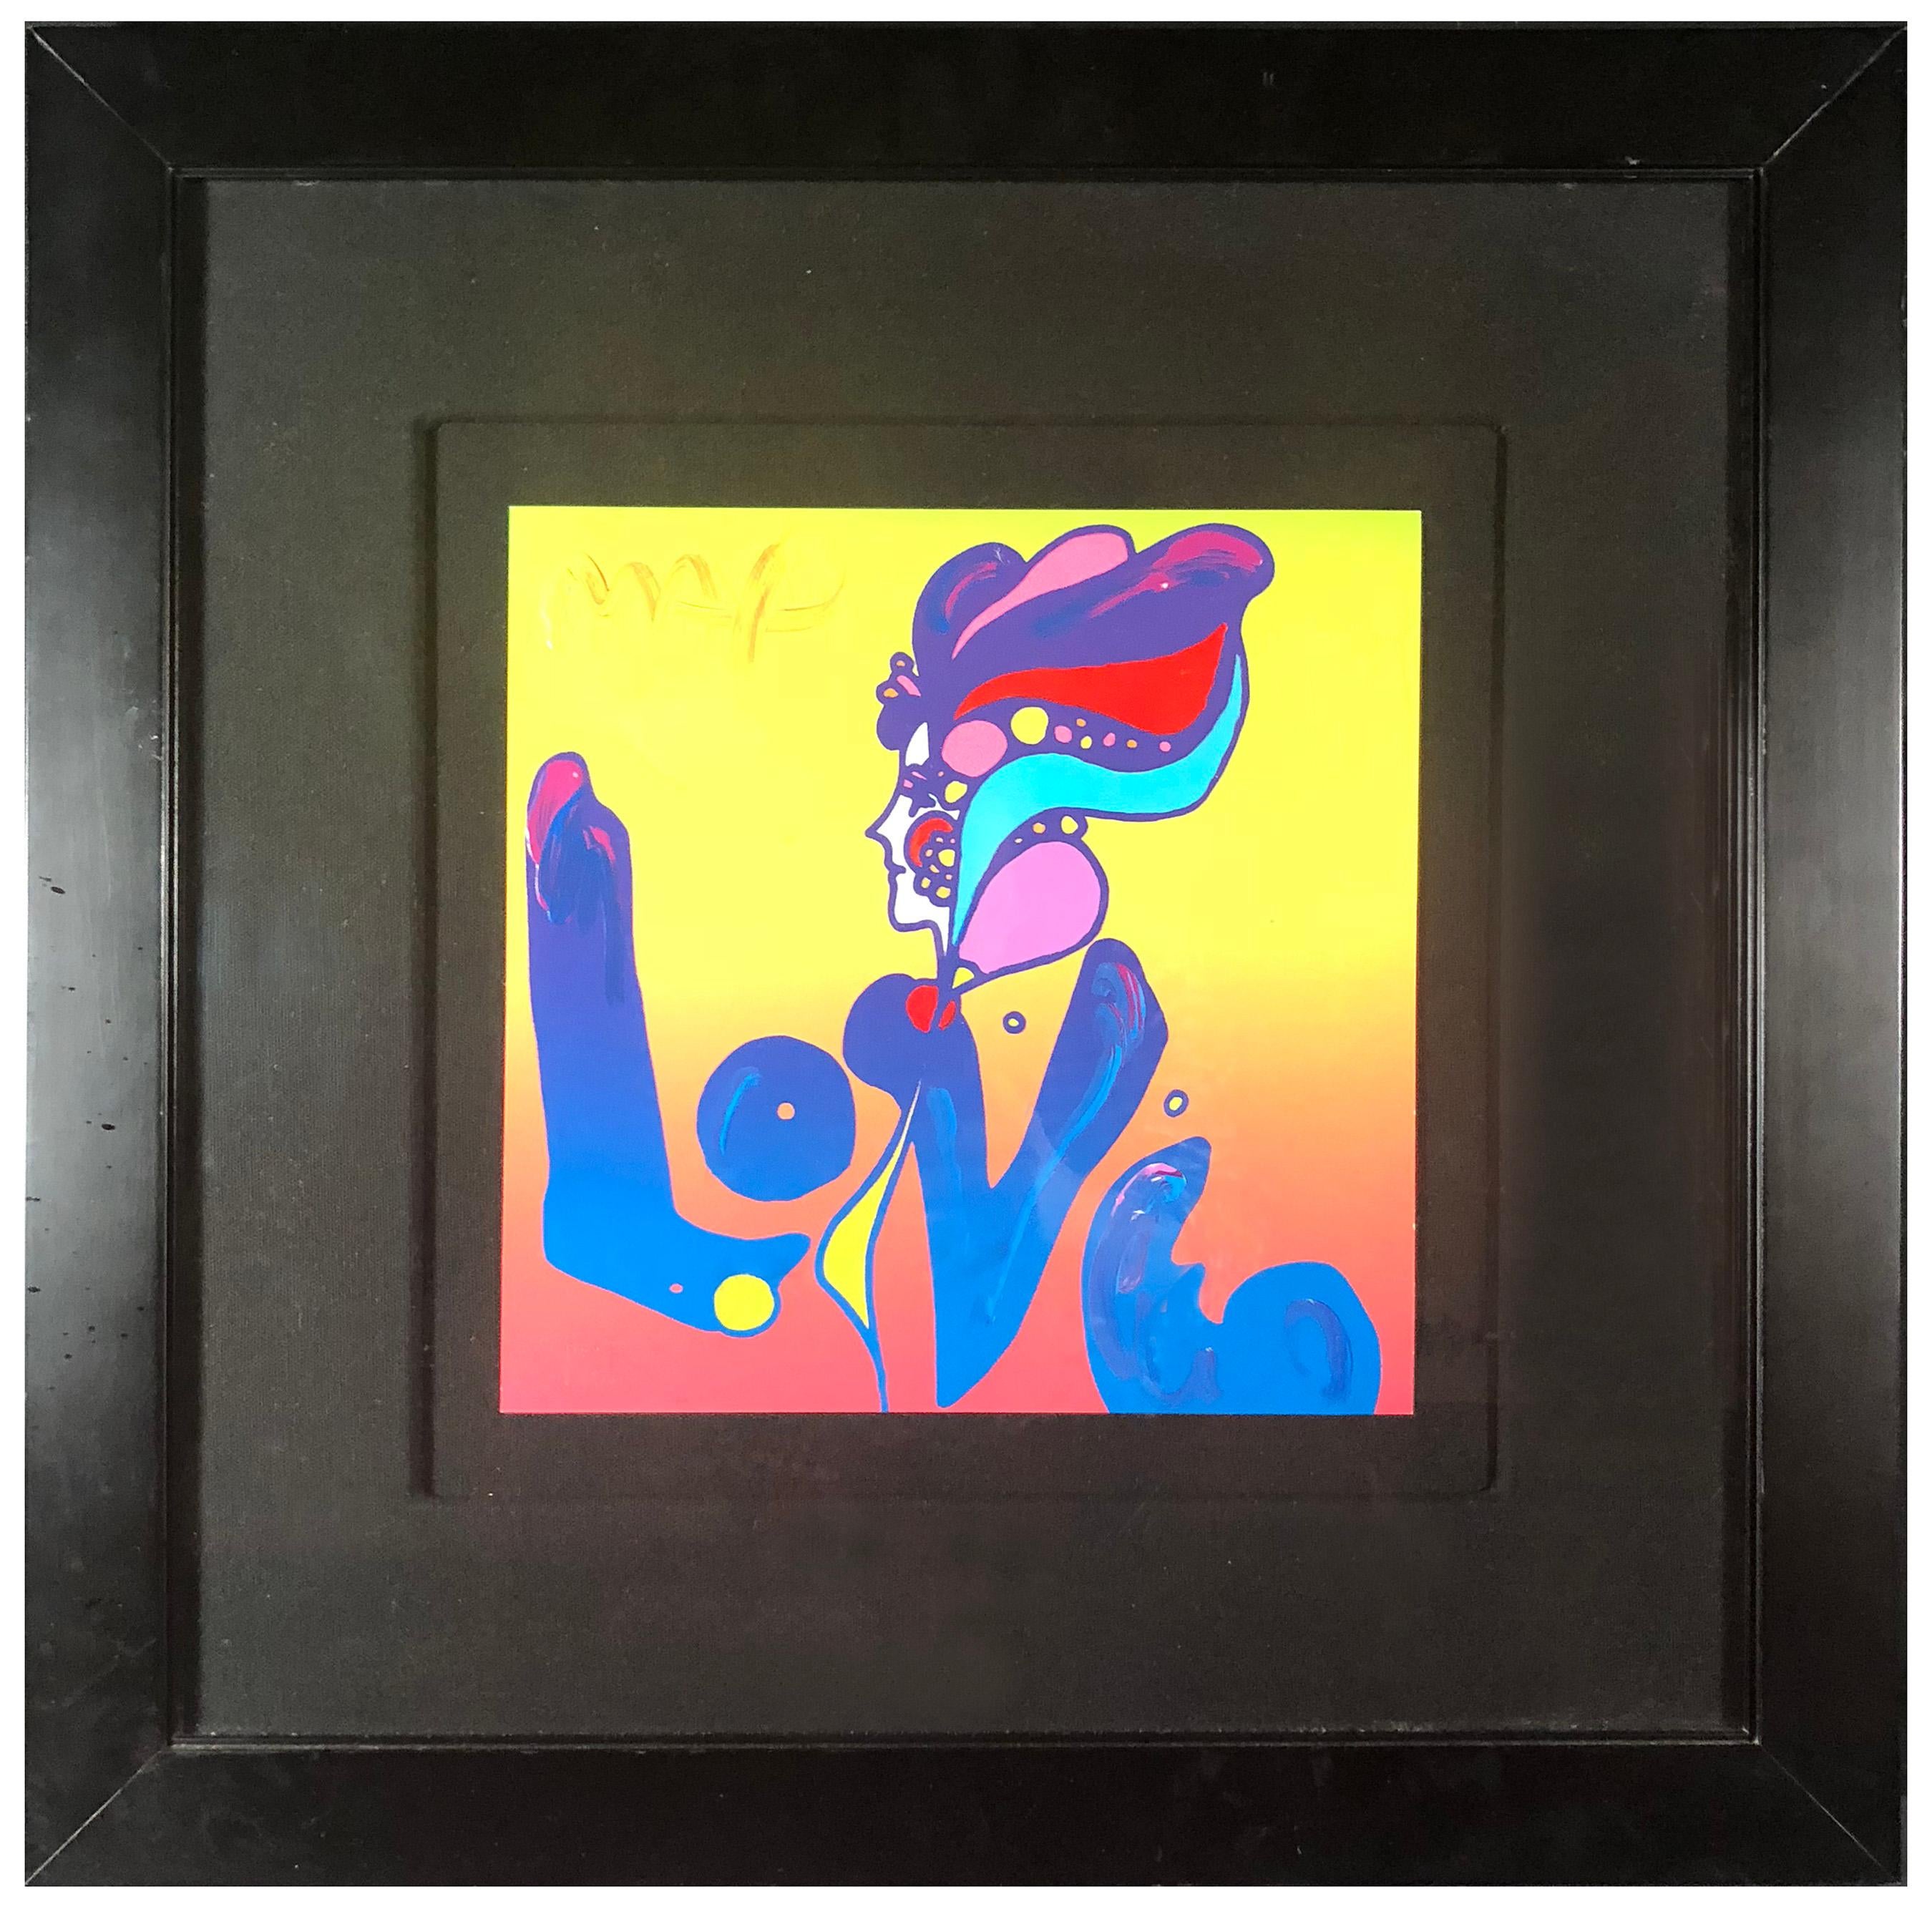 Retro II: LOVE - Painting by Peter Max